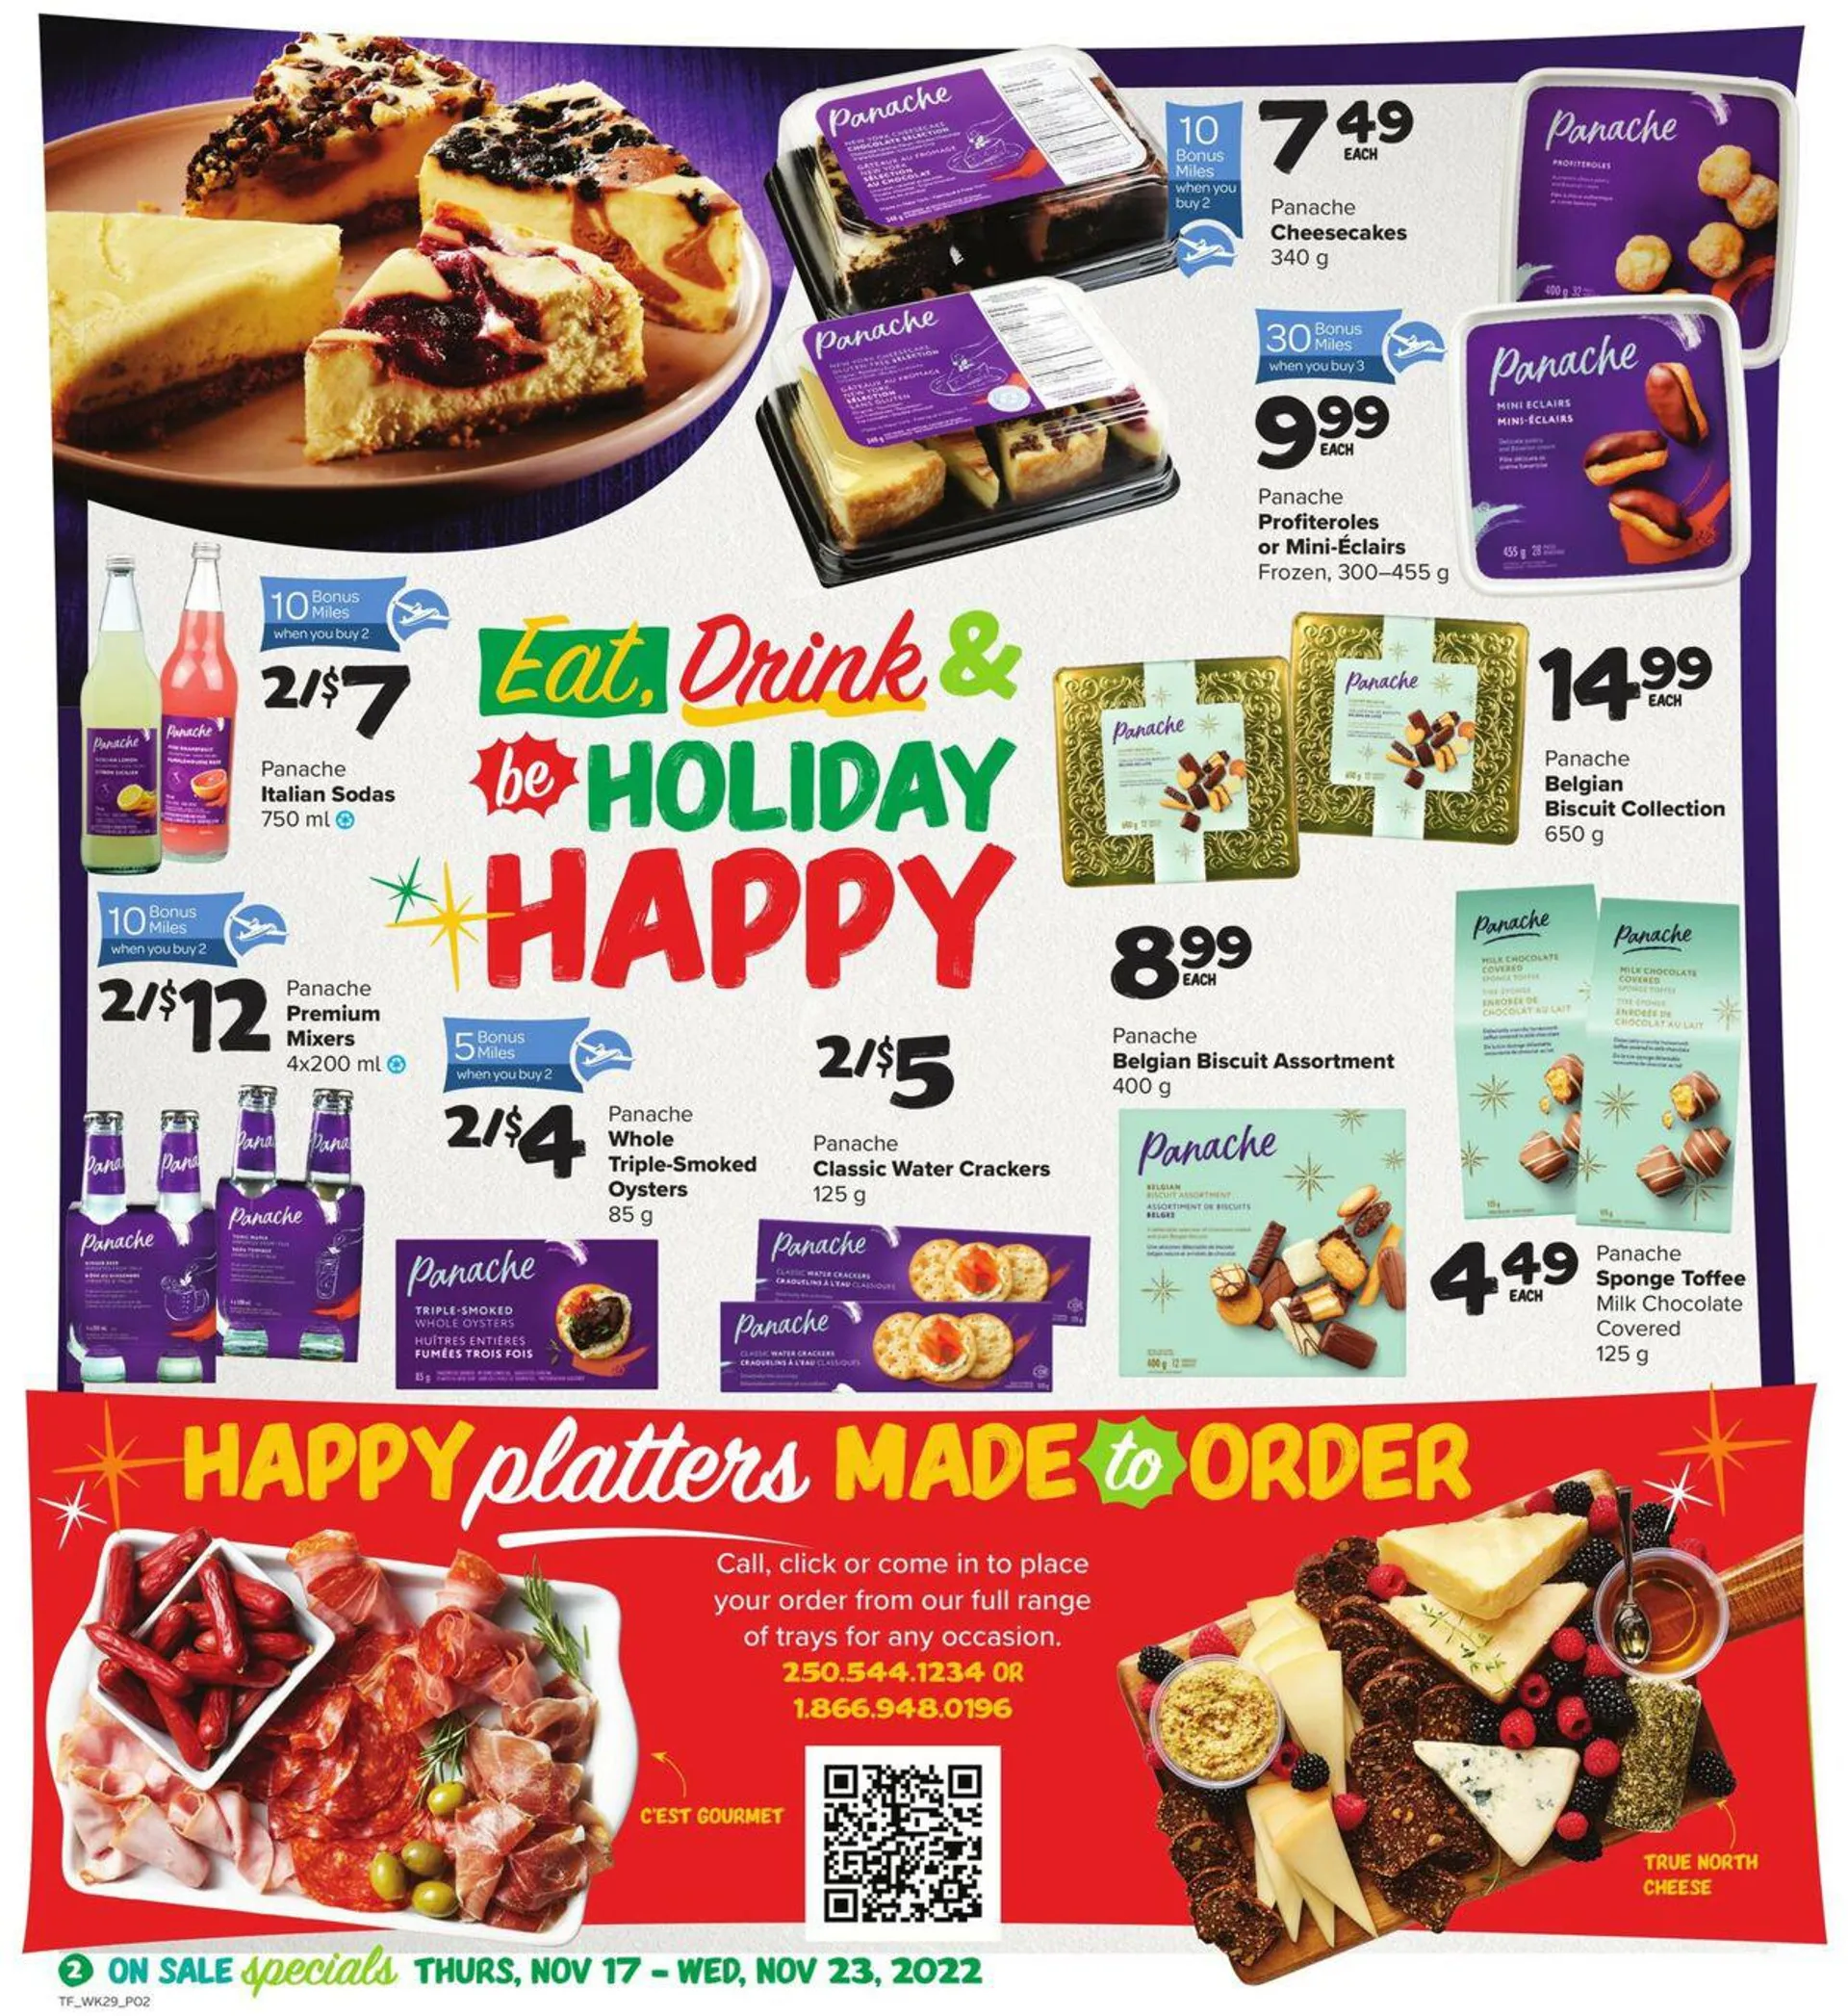 Thrifty Foods Current flyer - 2